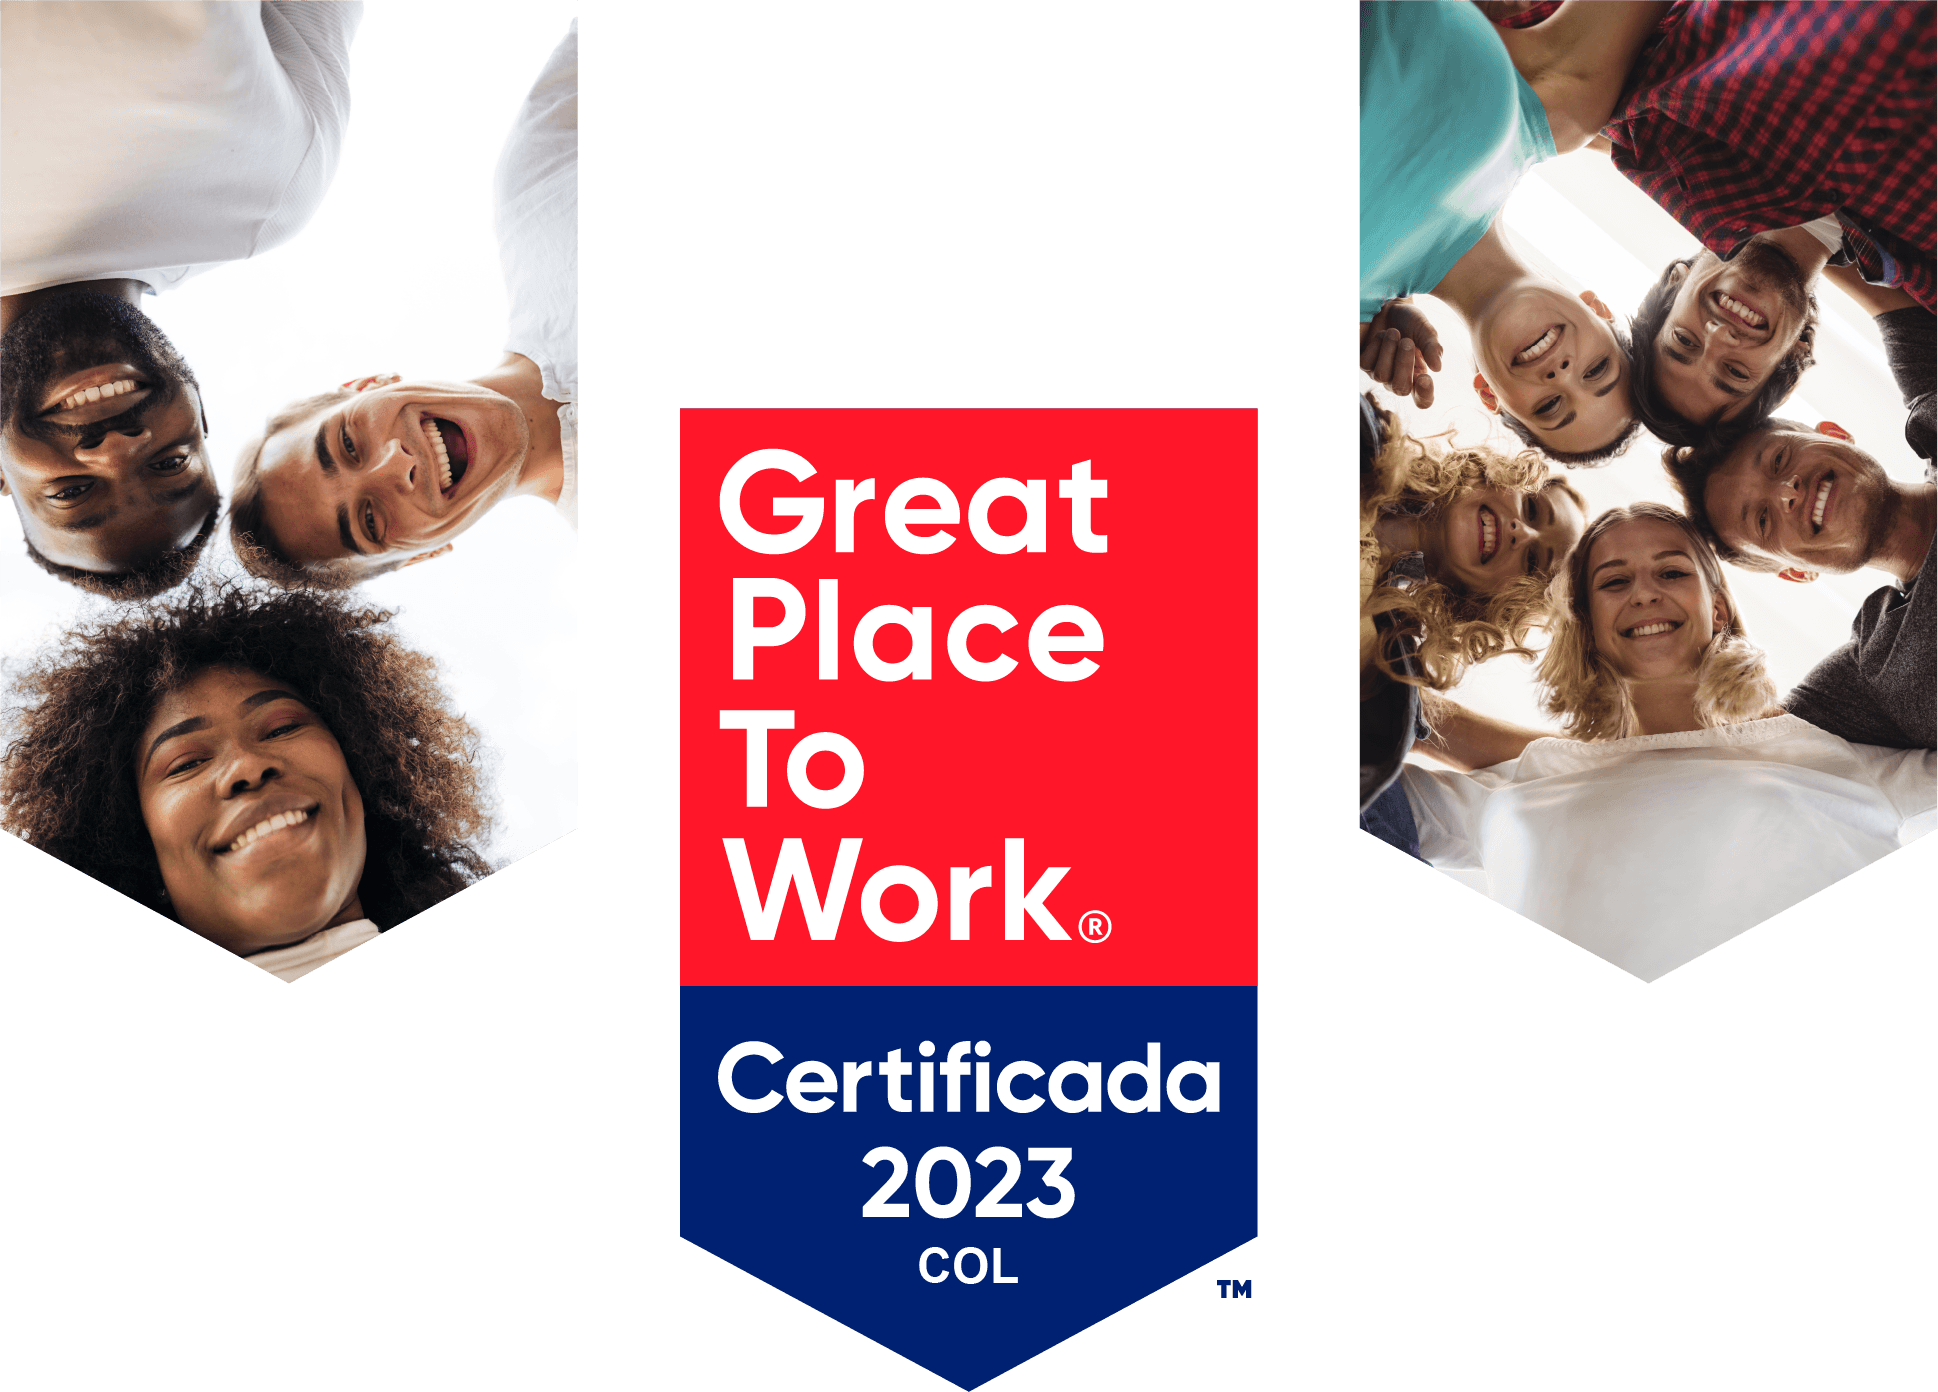 Marca Empleadora - Great Place to Work